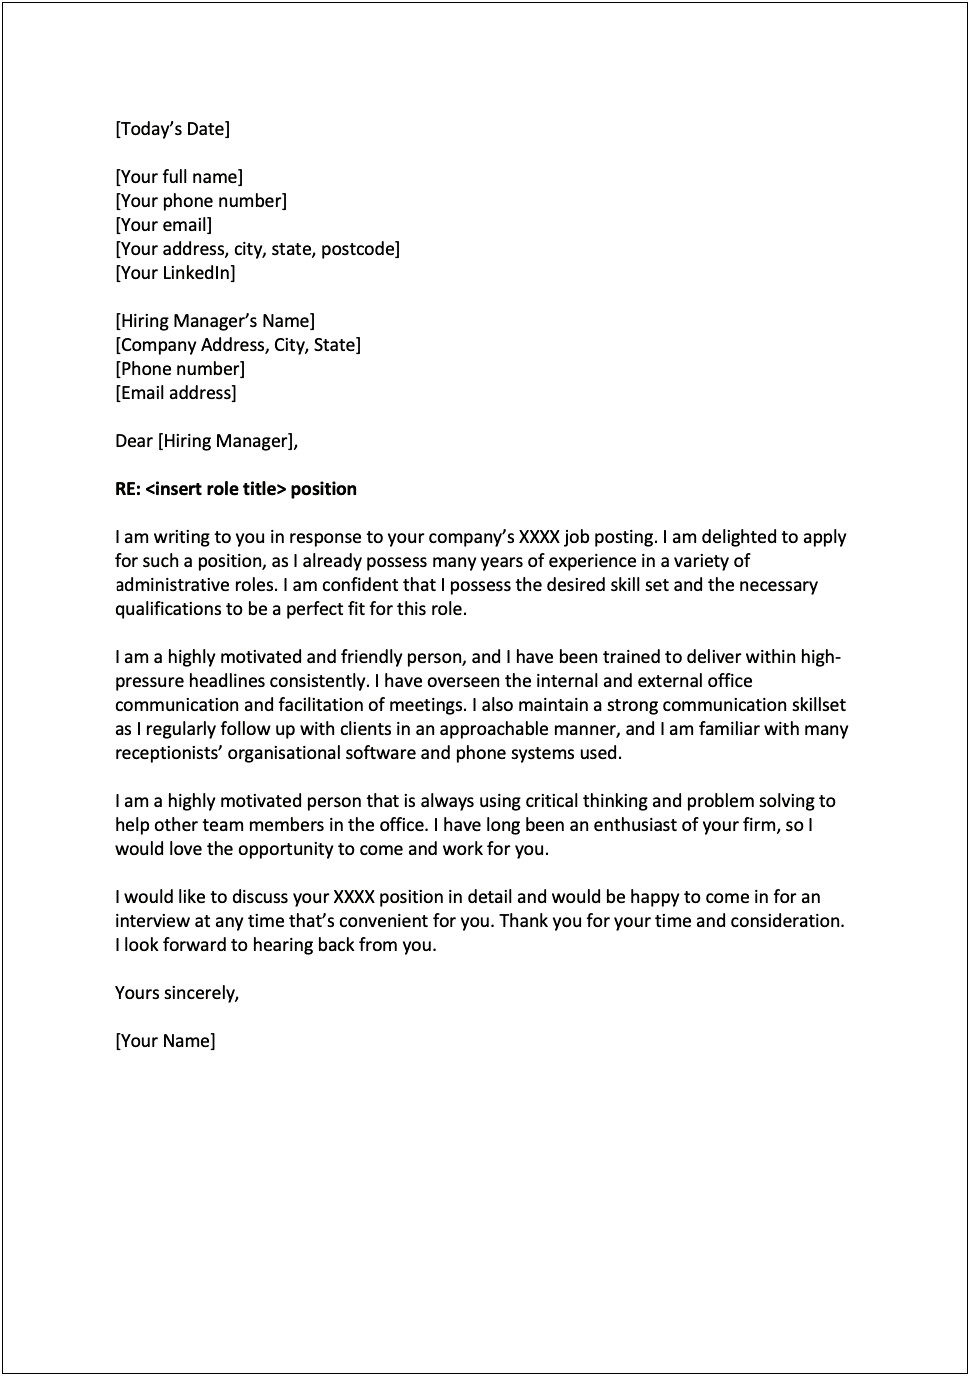 Resume Cover Letter Email Follow Up